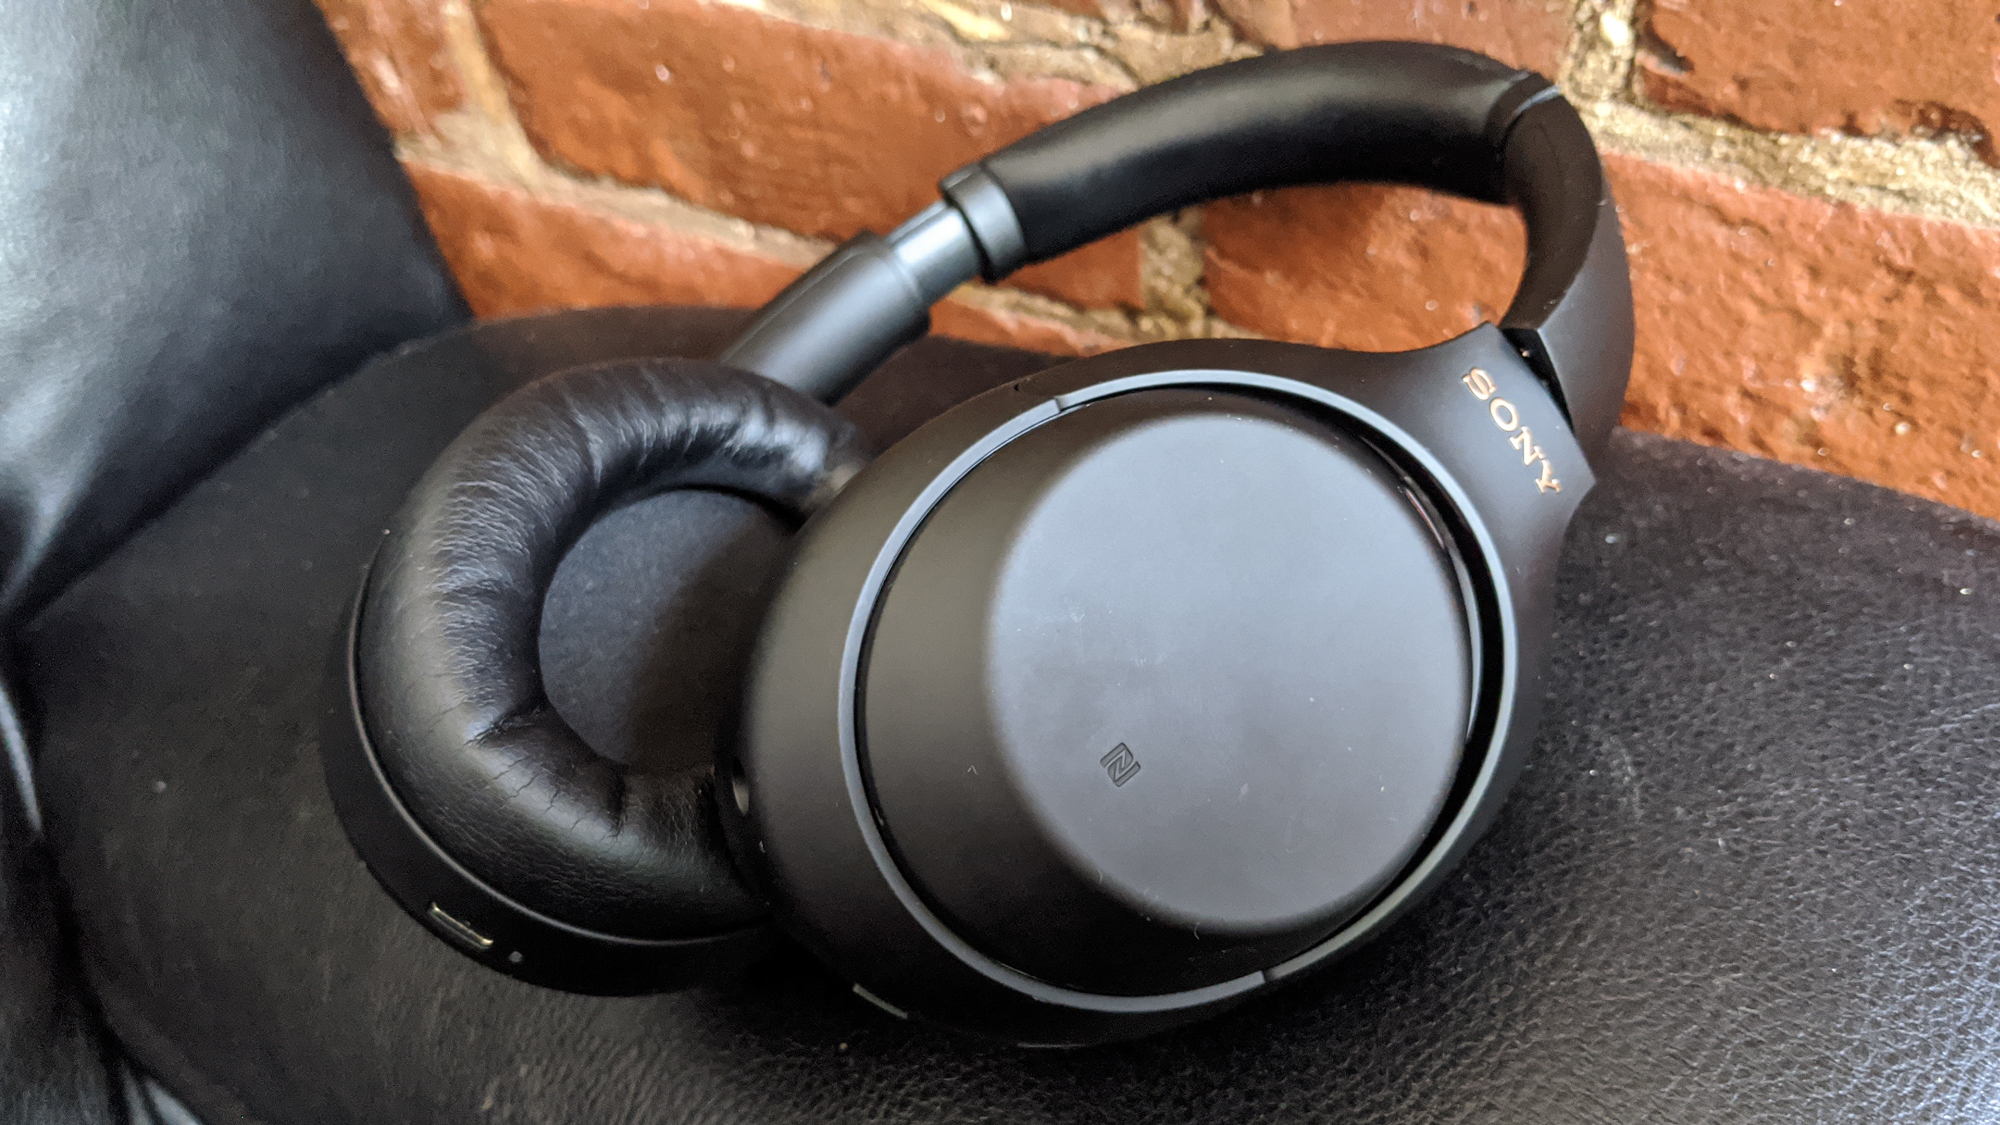 best Sony headphones and earbuds: Sony WH-1000xM4